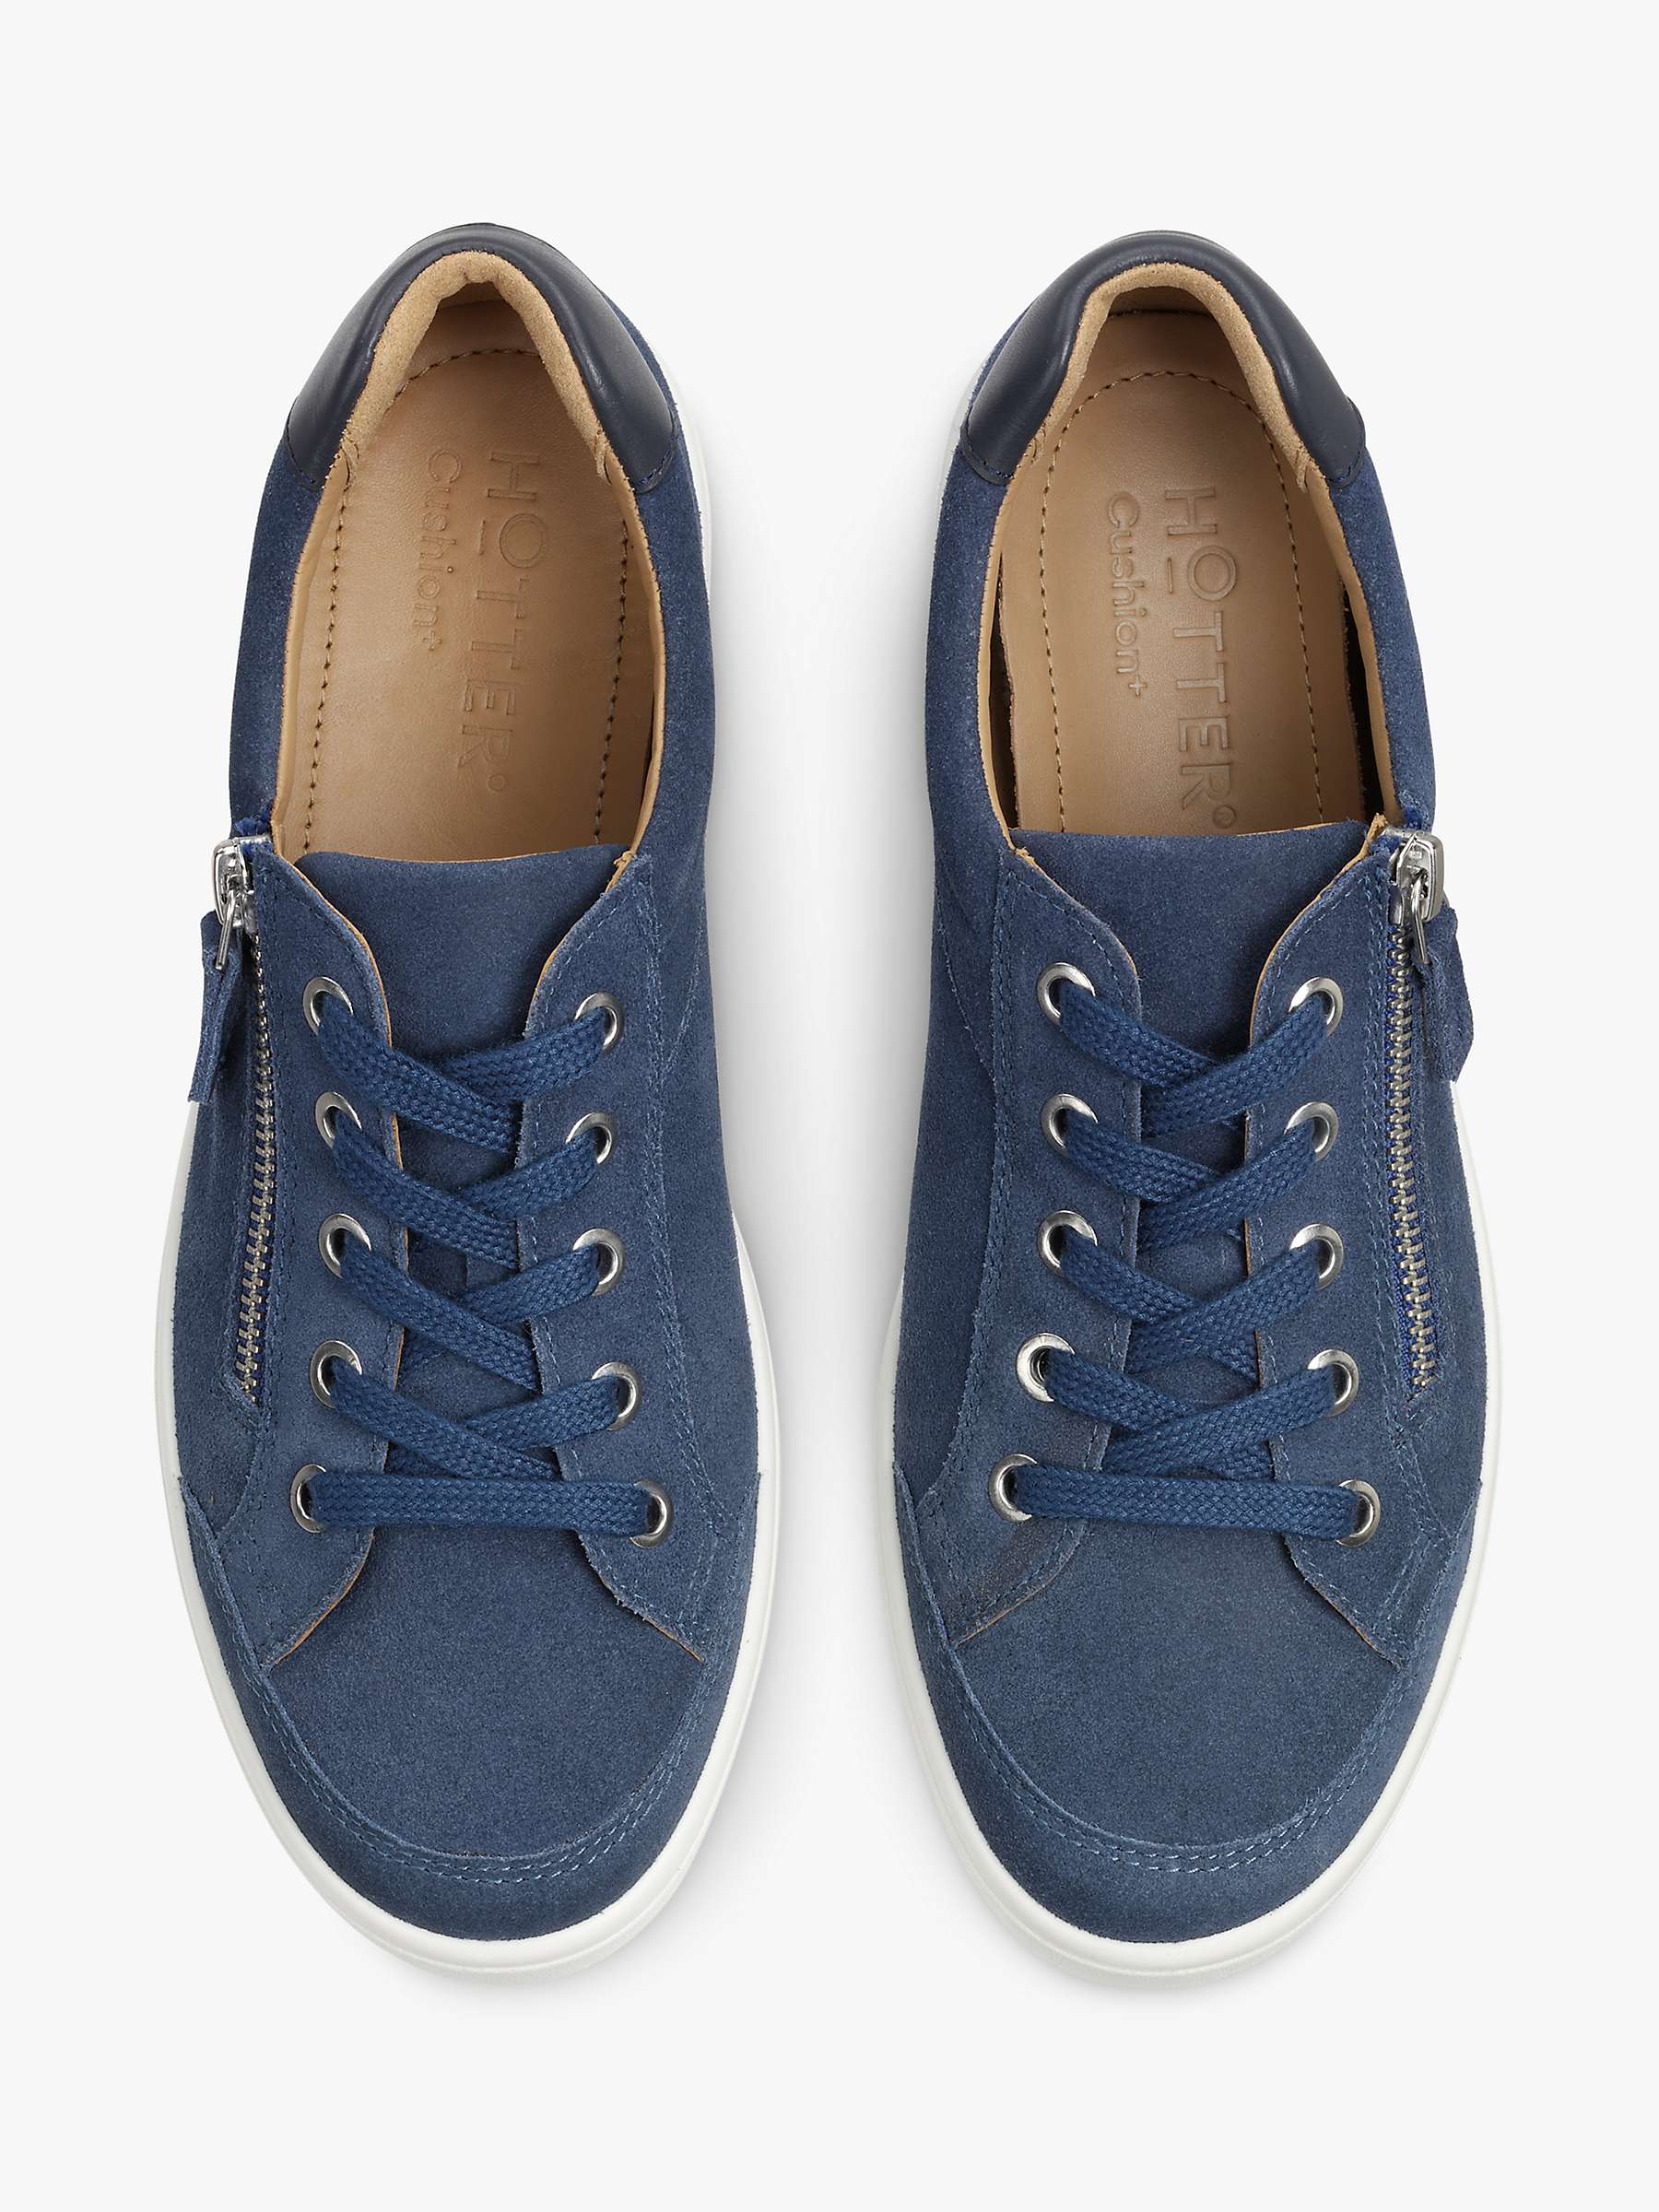 Buy Hotter Chase II Wide Fit Suede Zip and Go Trainers, Denim Blue Online at johnlewis.com